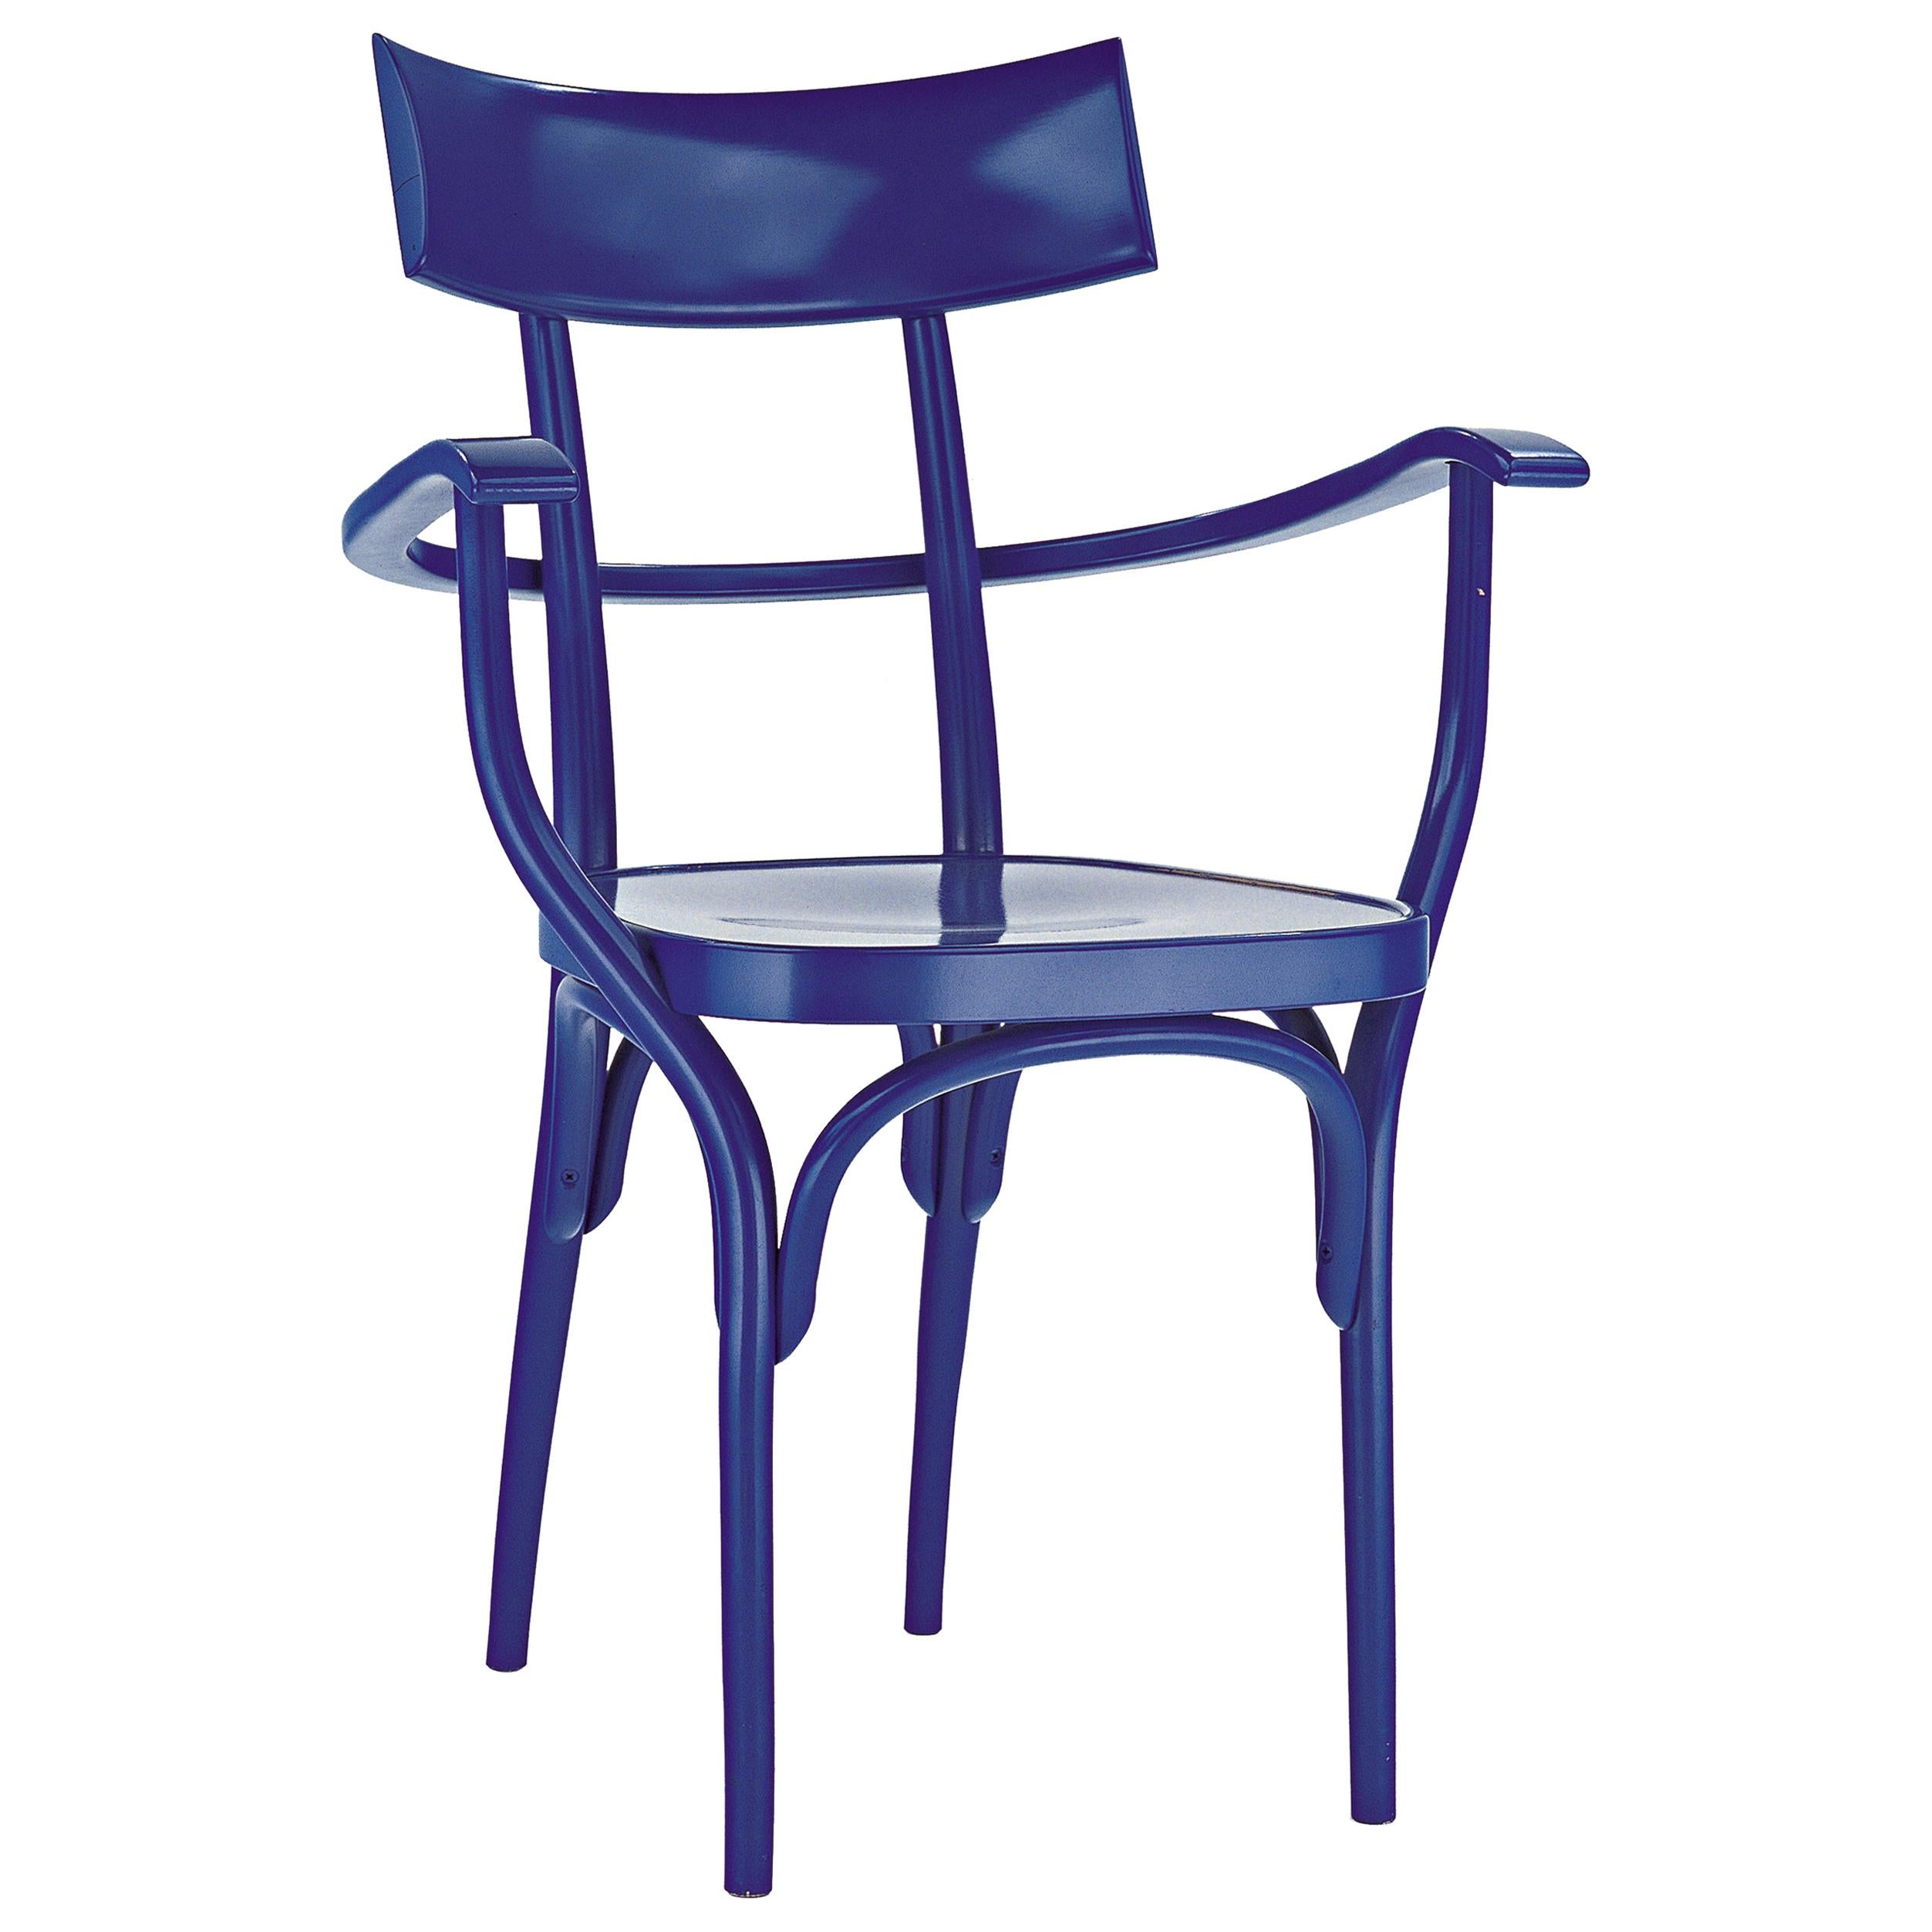 Gebrüder Thonet Vienna GmbH Czech Armchair in Steel Blue with Plywood Seat For Sale